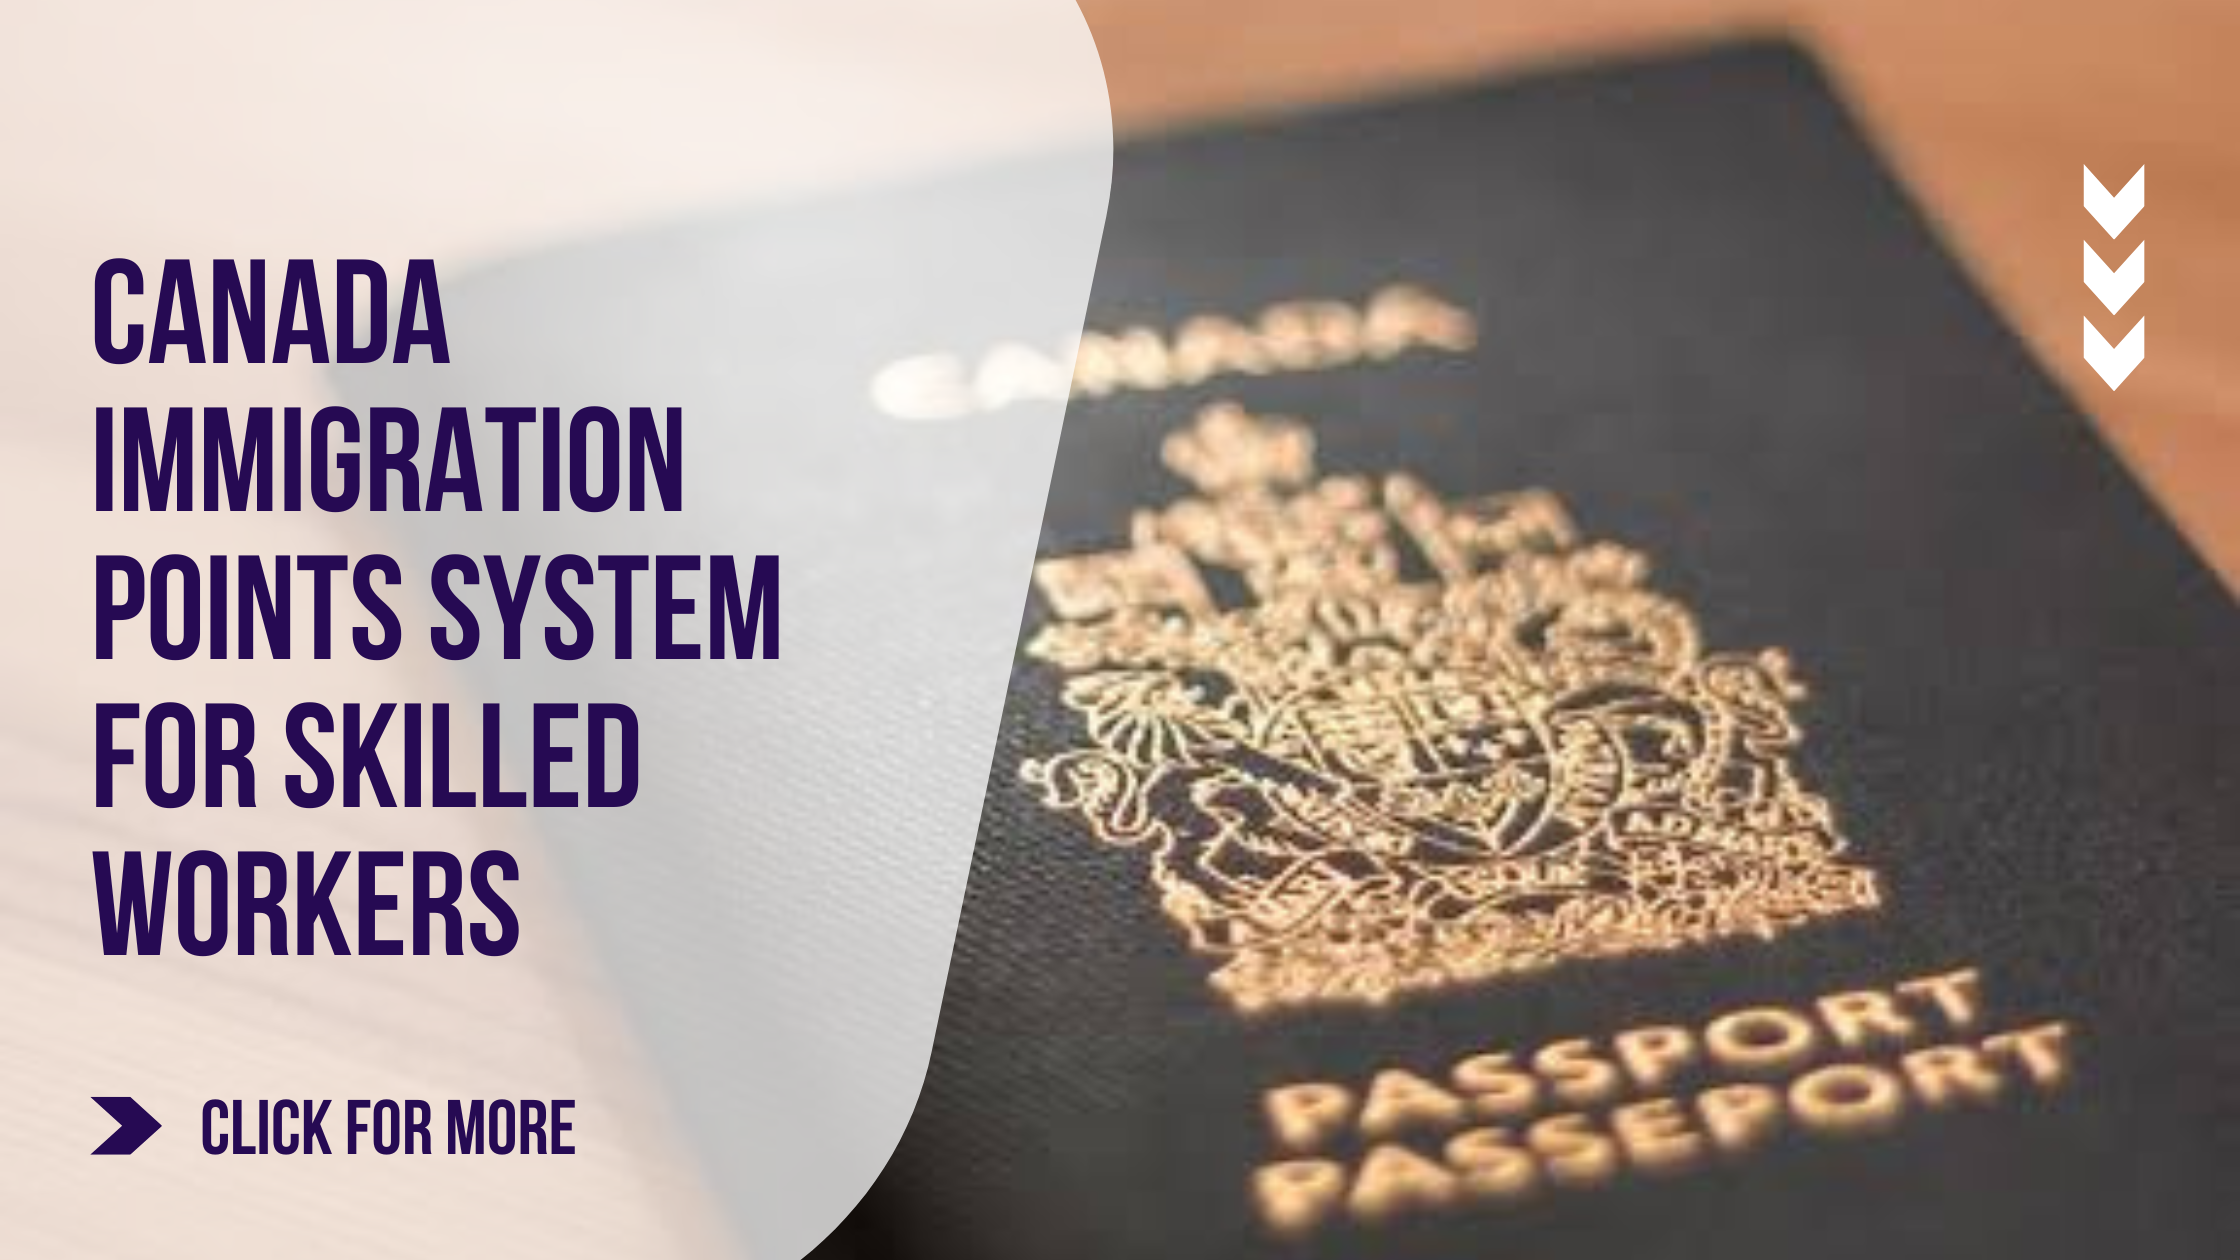 Application Tips for Canada Immigration Points System for Skilled Workers